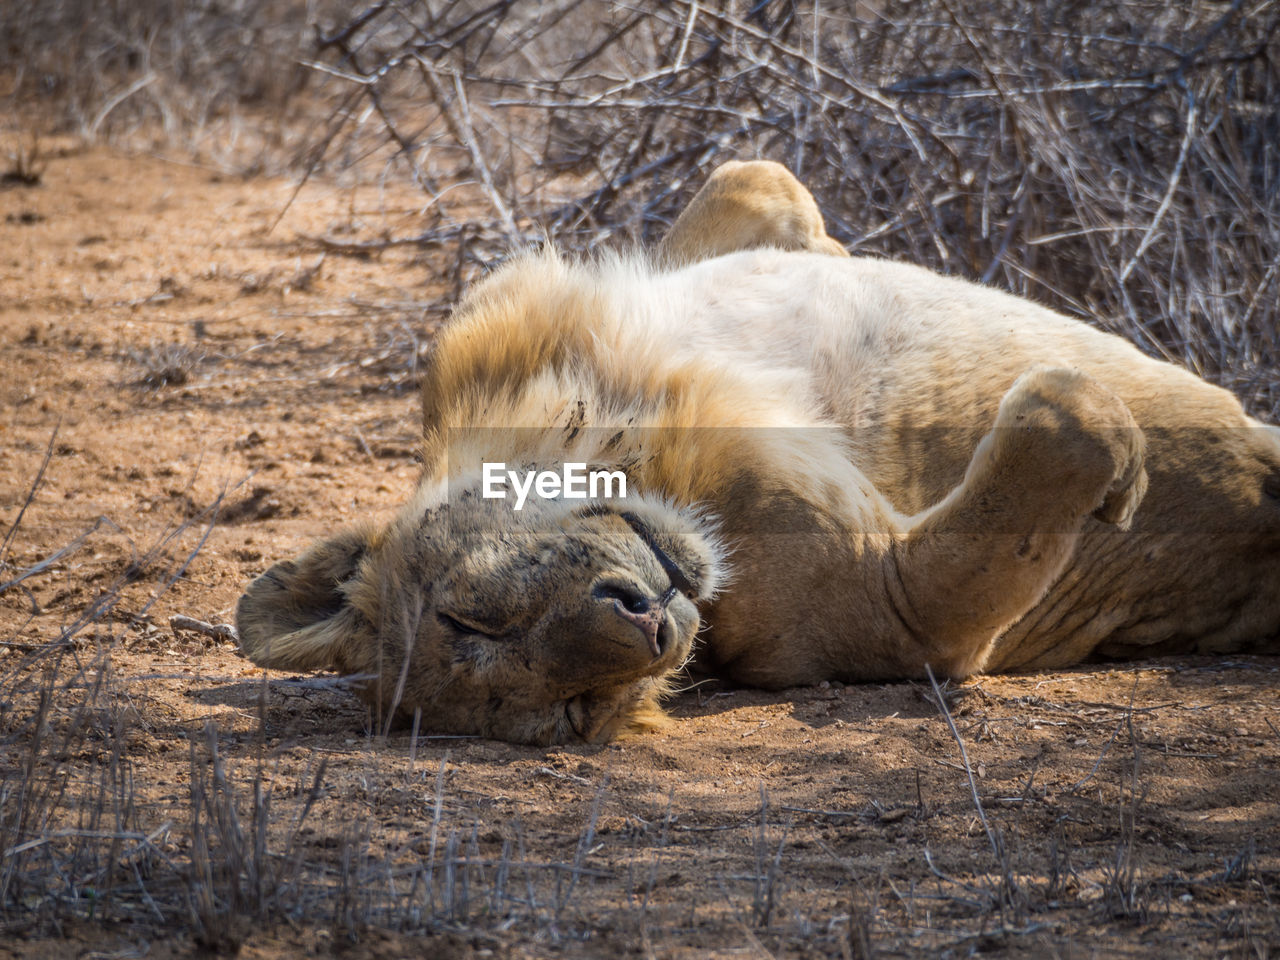 Lion lying on ground sleeping, kruger national park, south africa